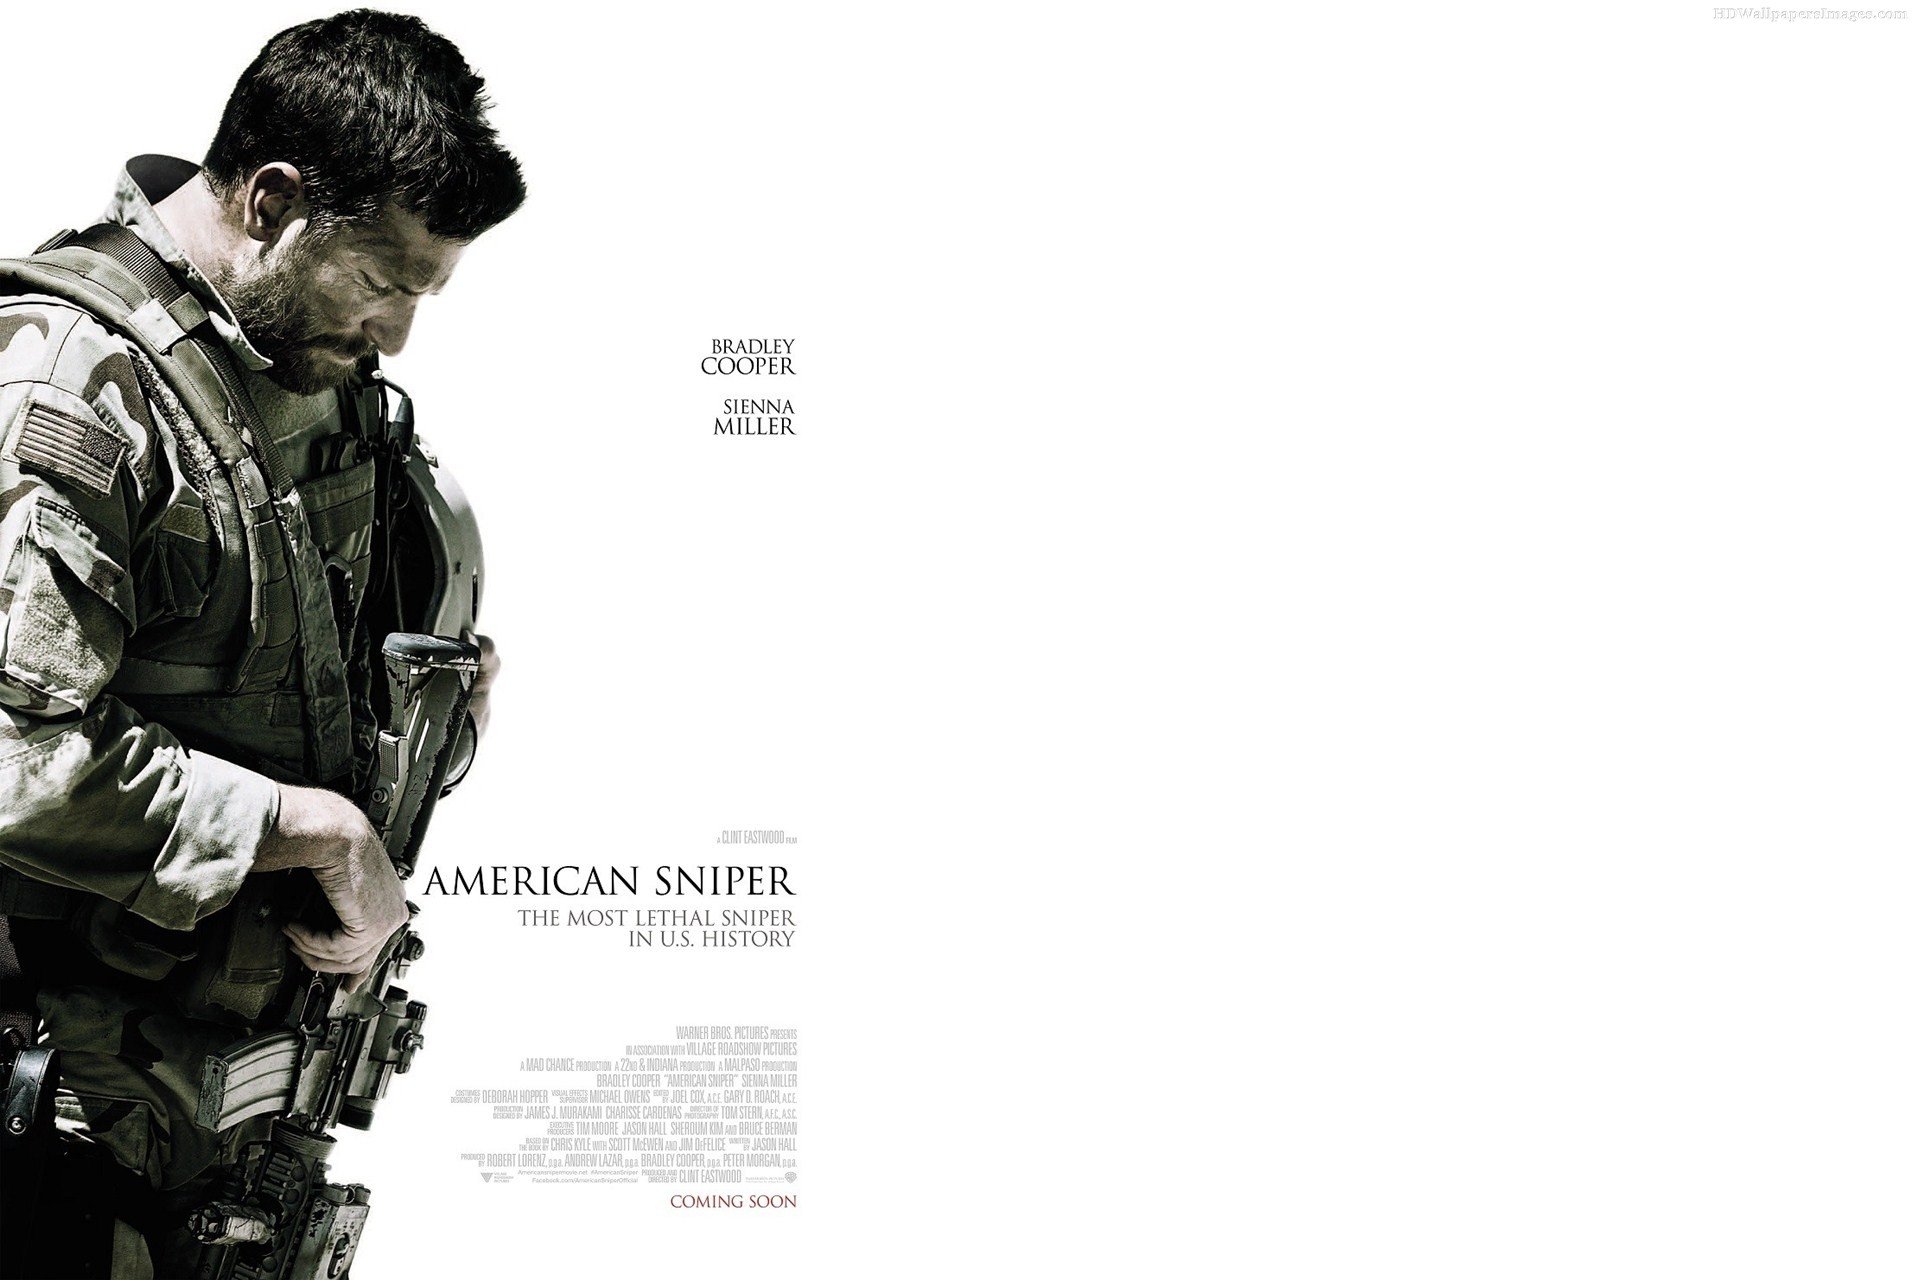 AMERICAN SNIPER biography military war fighting navy seal action clint